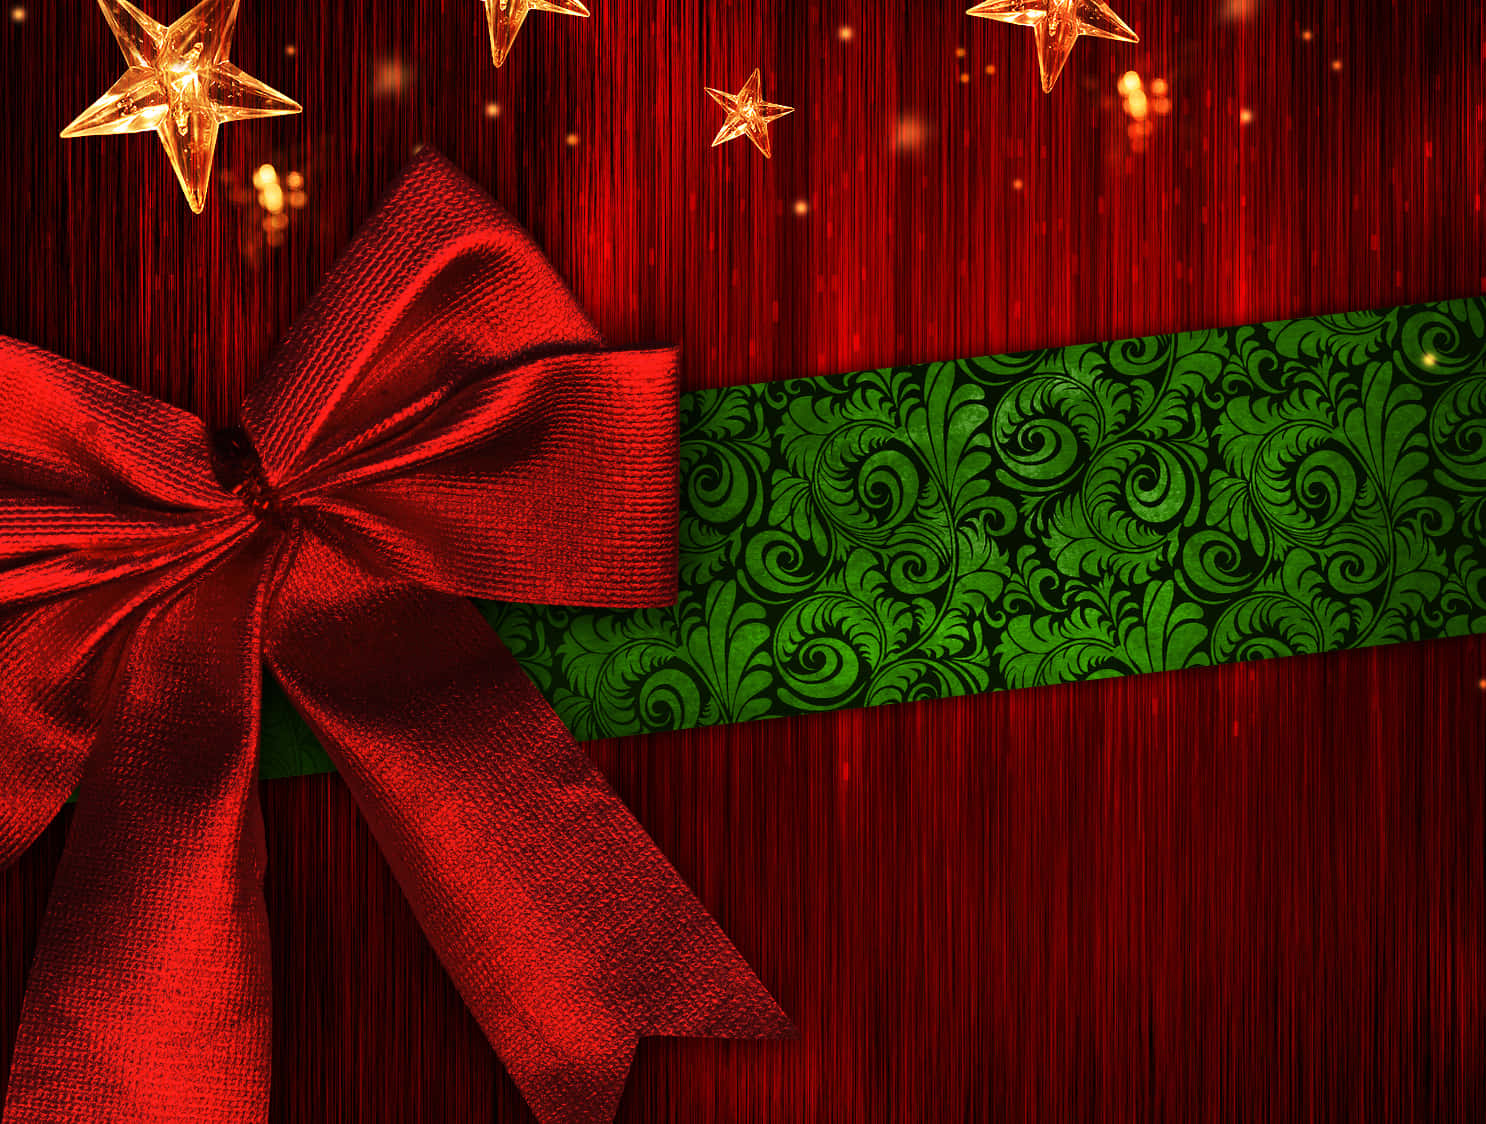 Add a splash of holiday cheer with a Christmas red background!